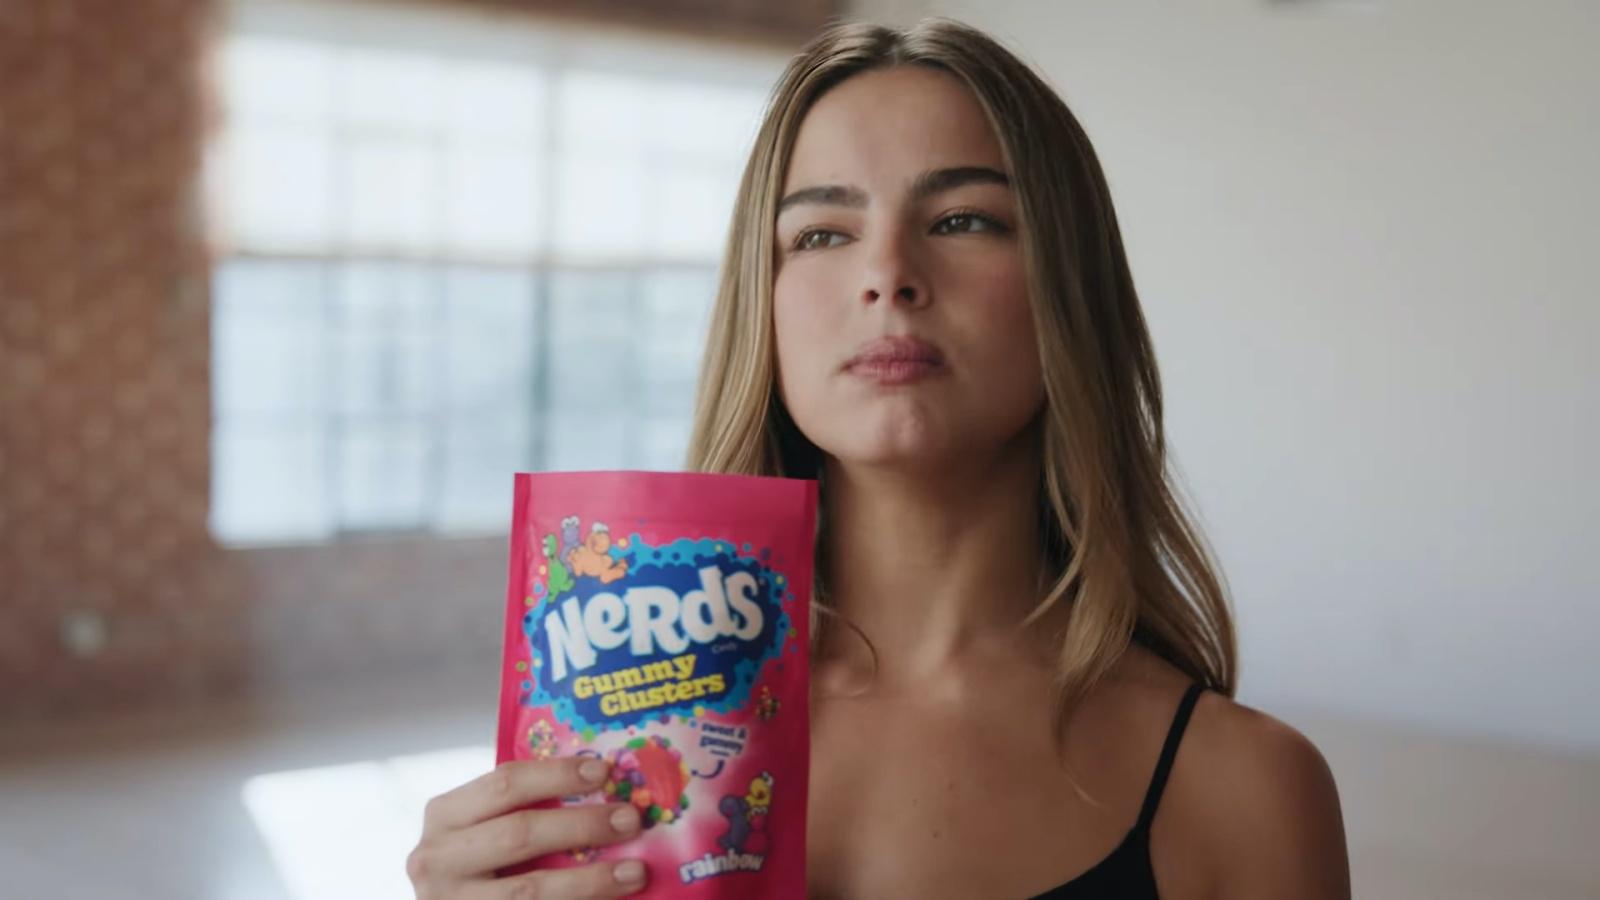 Addison Rae eats Nerds candy in a Super Bowl commercial teaser